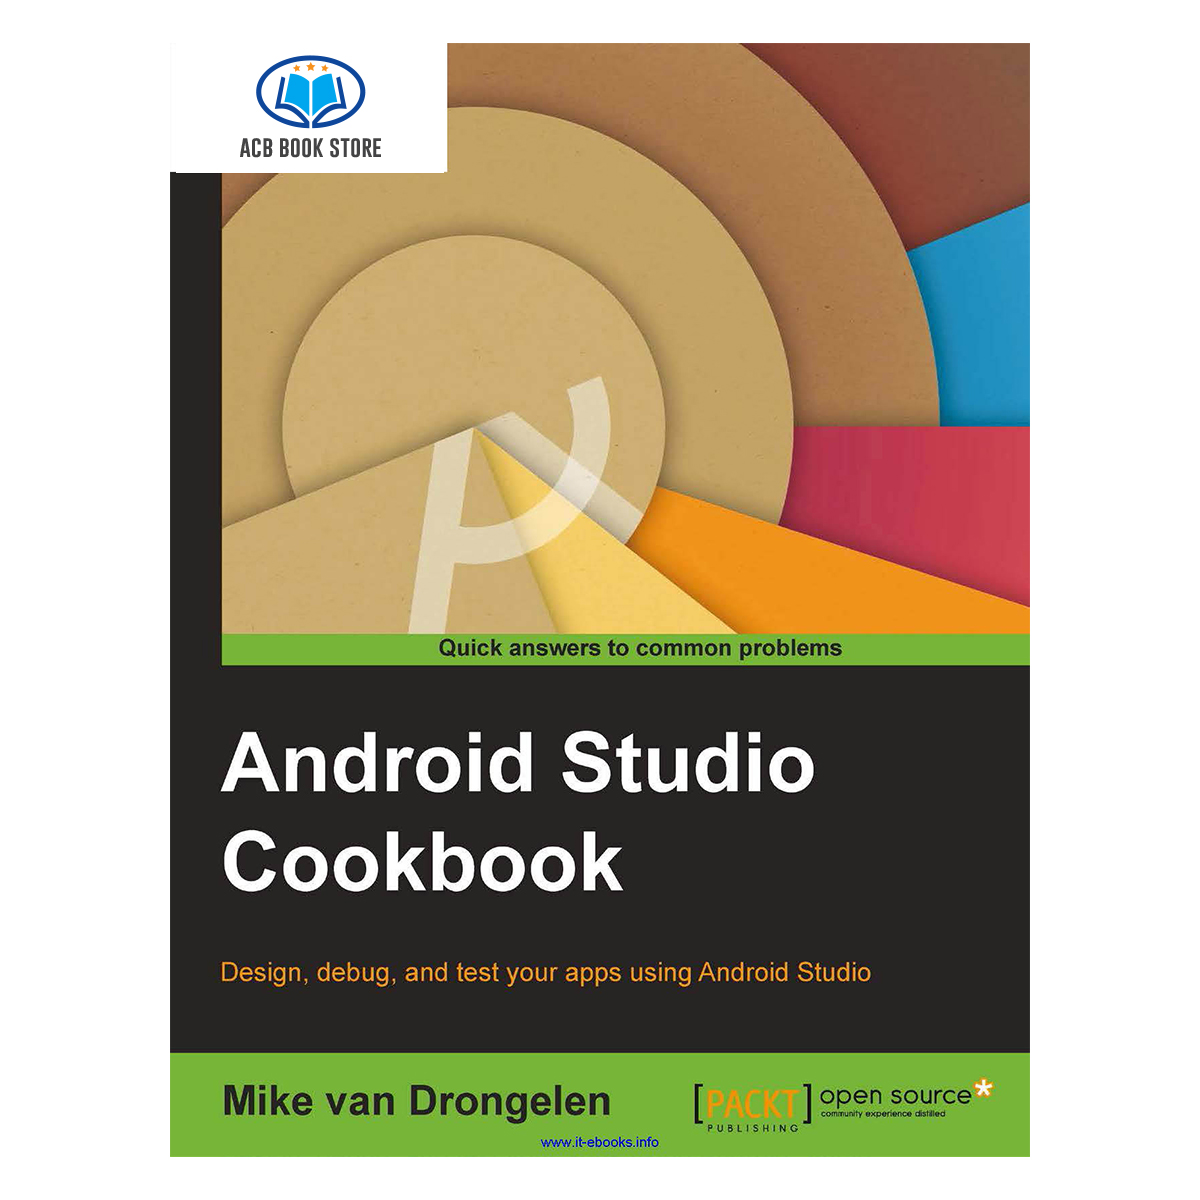 Sách Android Studio Cookbook - ACB Bookstore